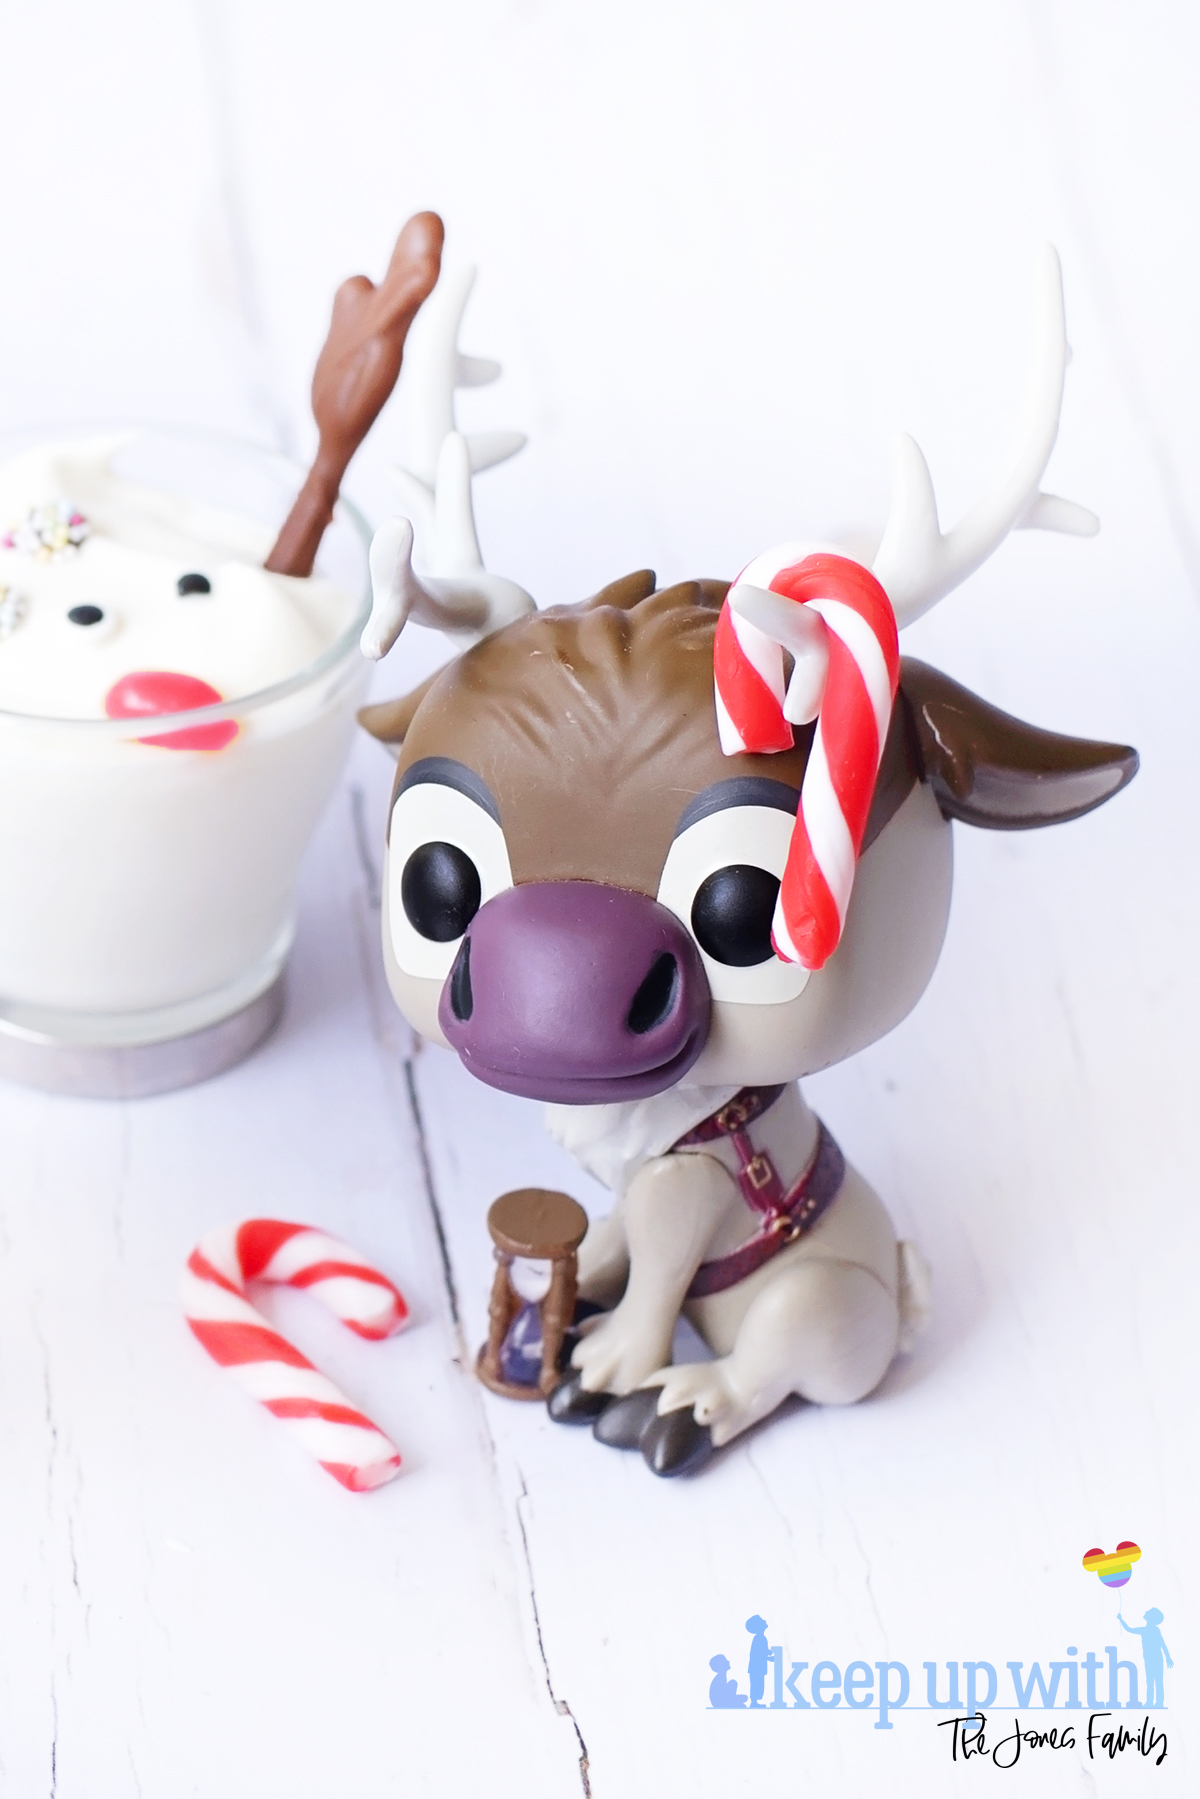 Image shows a Disney's Frozen Sven the Reindeer Funko Pop Vinyl decorated with mini red and white peppermint candy canes on his antlers. The figure is sitting next to a Melted Sven the Reindeer Yoghurts in glass cups with silver handles, on a white wooden tabletop. Image by Keep Up With The Jones Family.